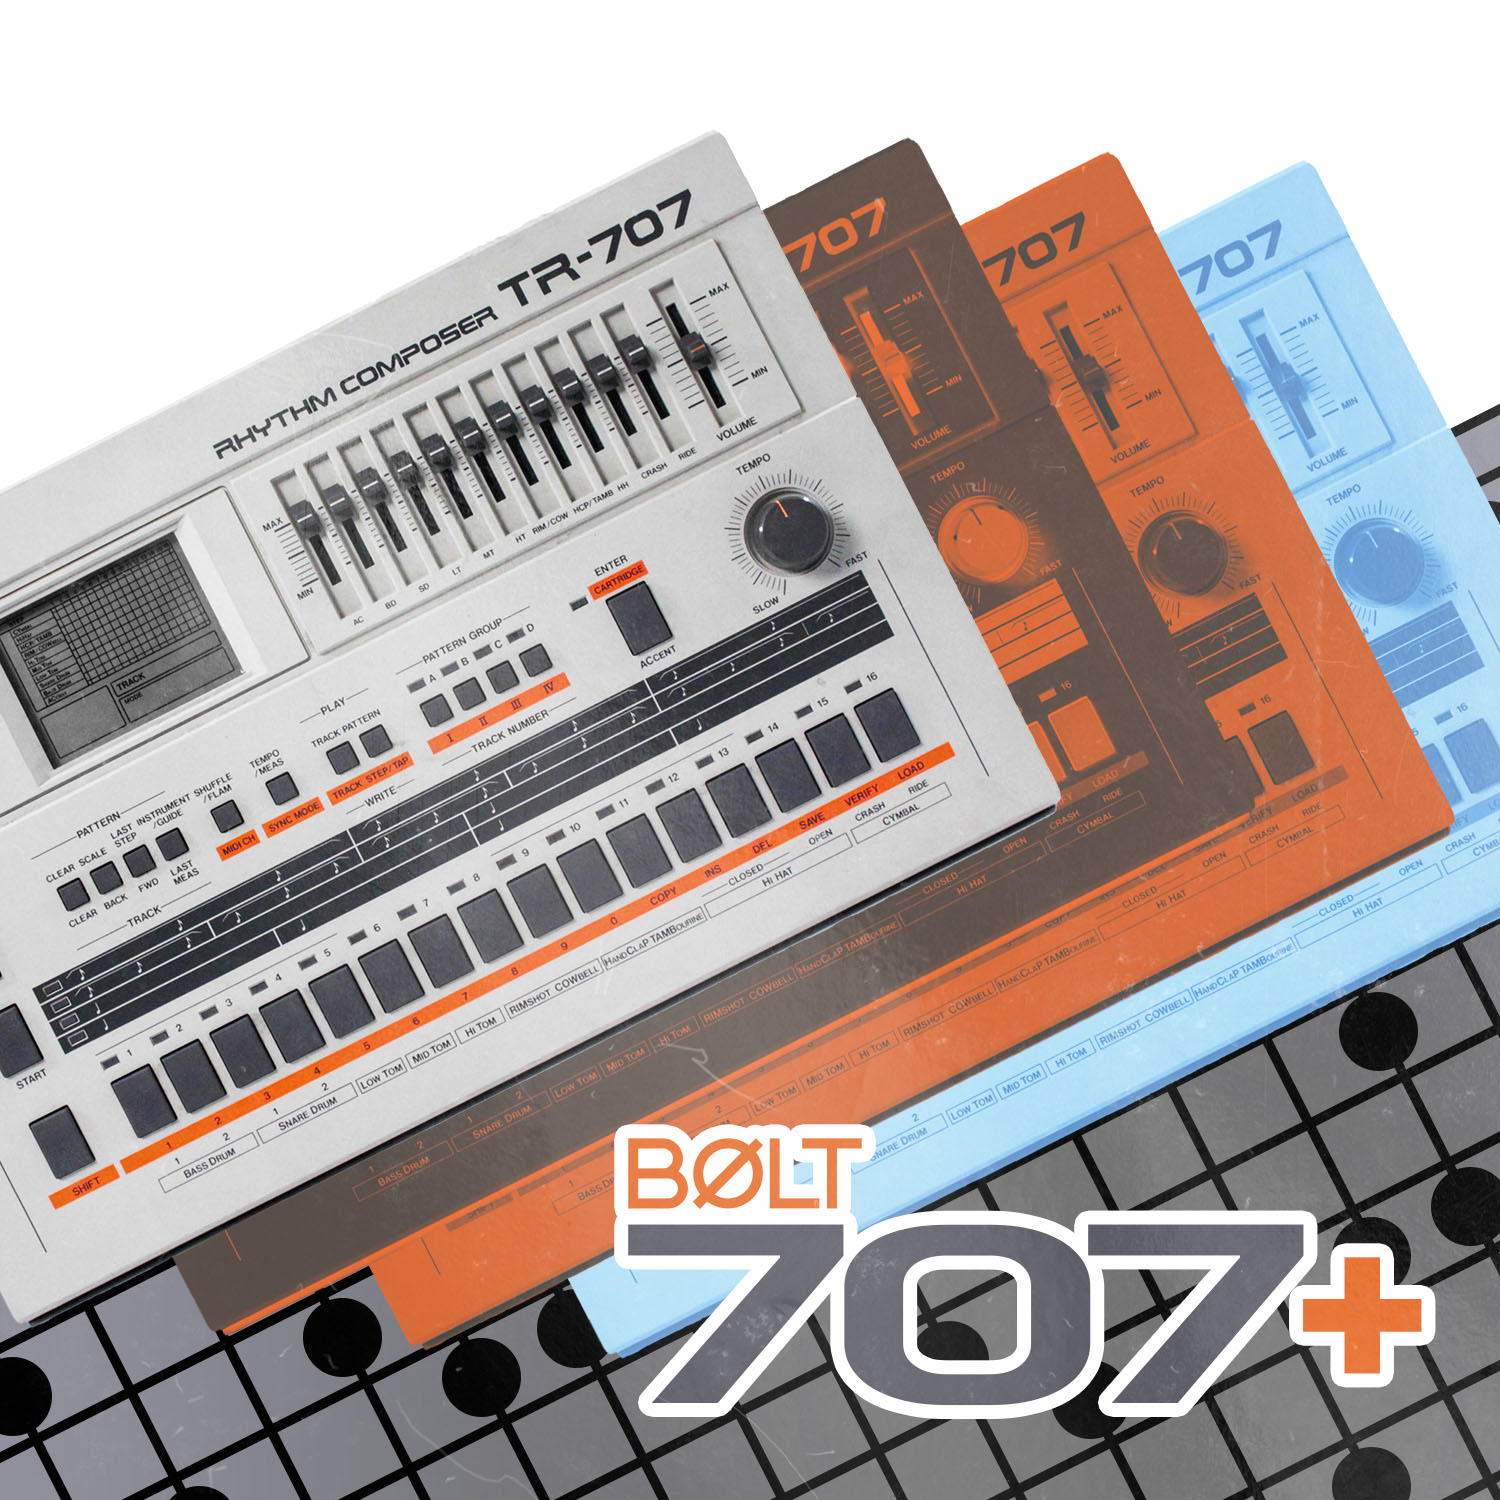 707+ // the definitive TR-707 Kit